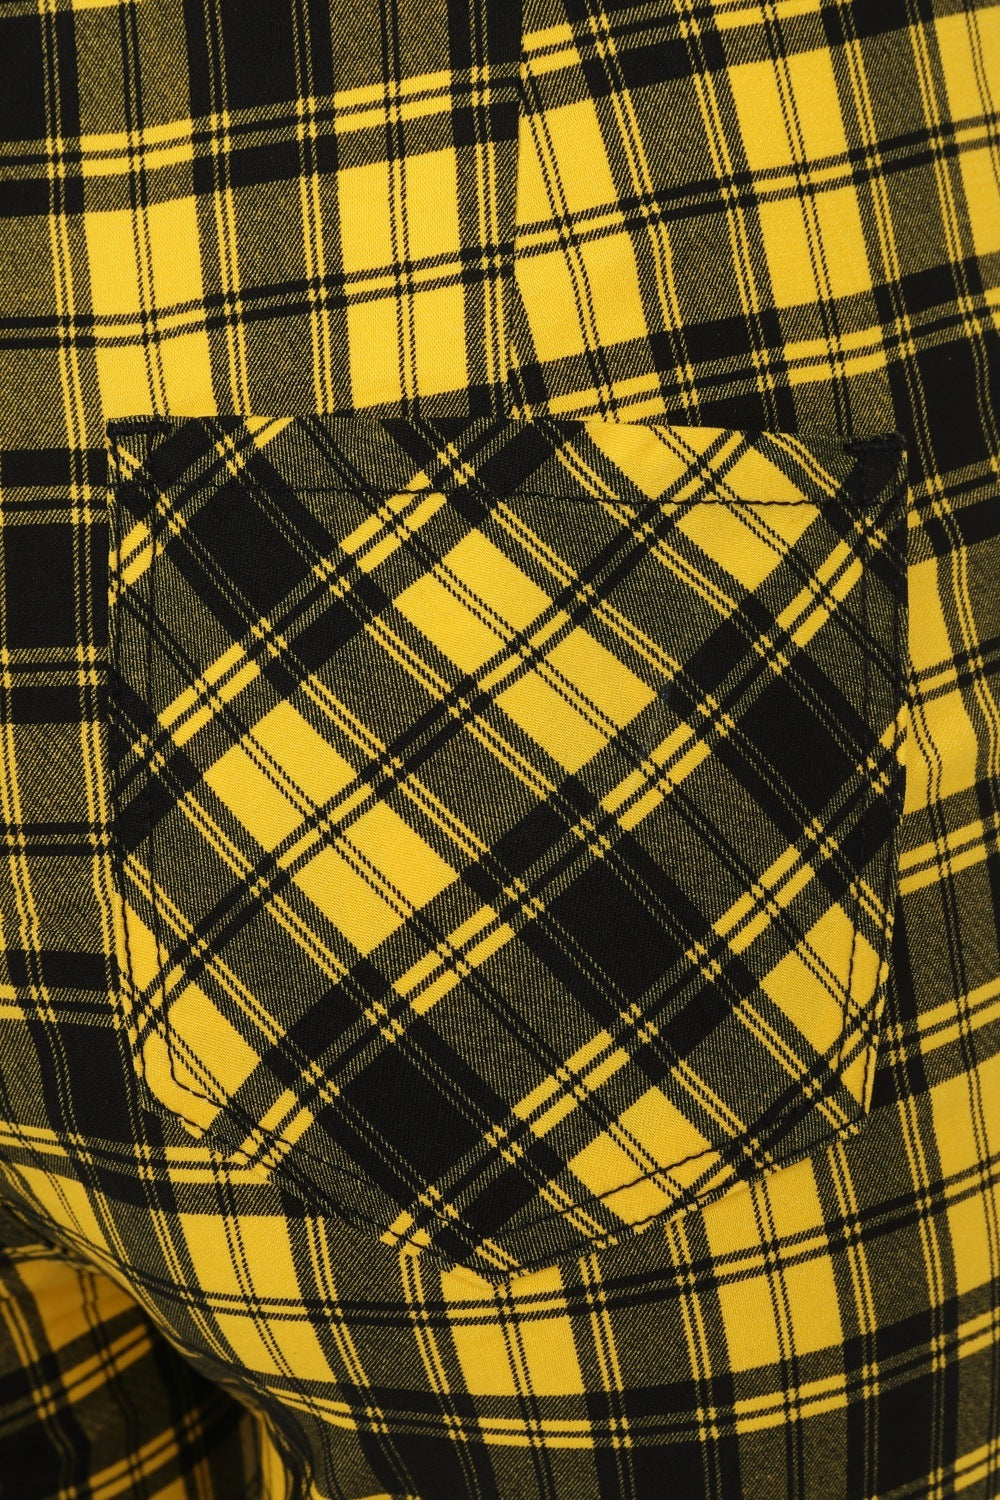 High waisted trousers in yellow tartan with zip front and pentagram zip details